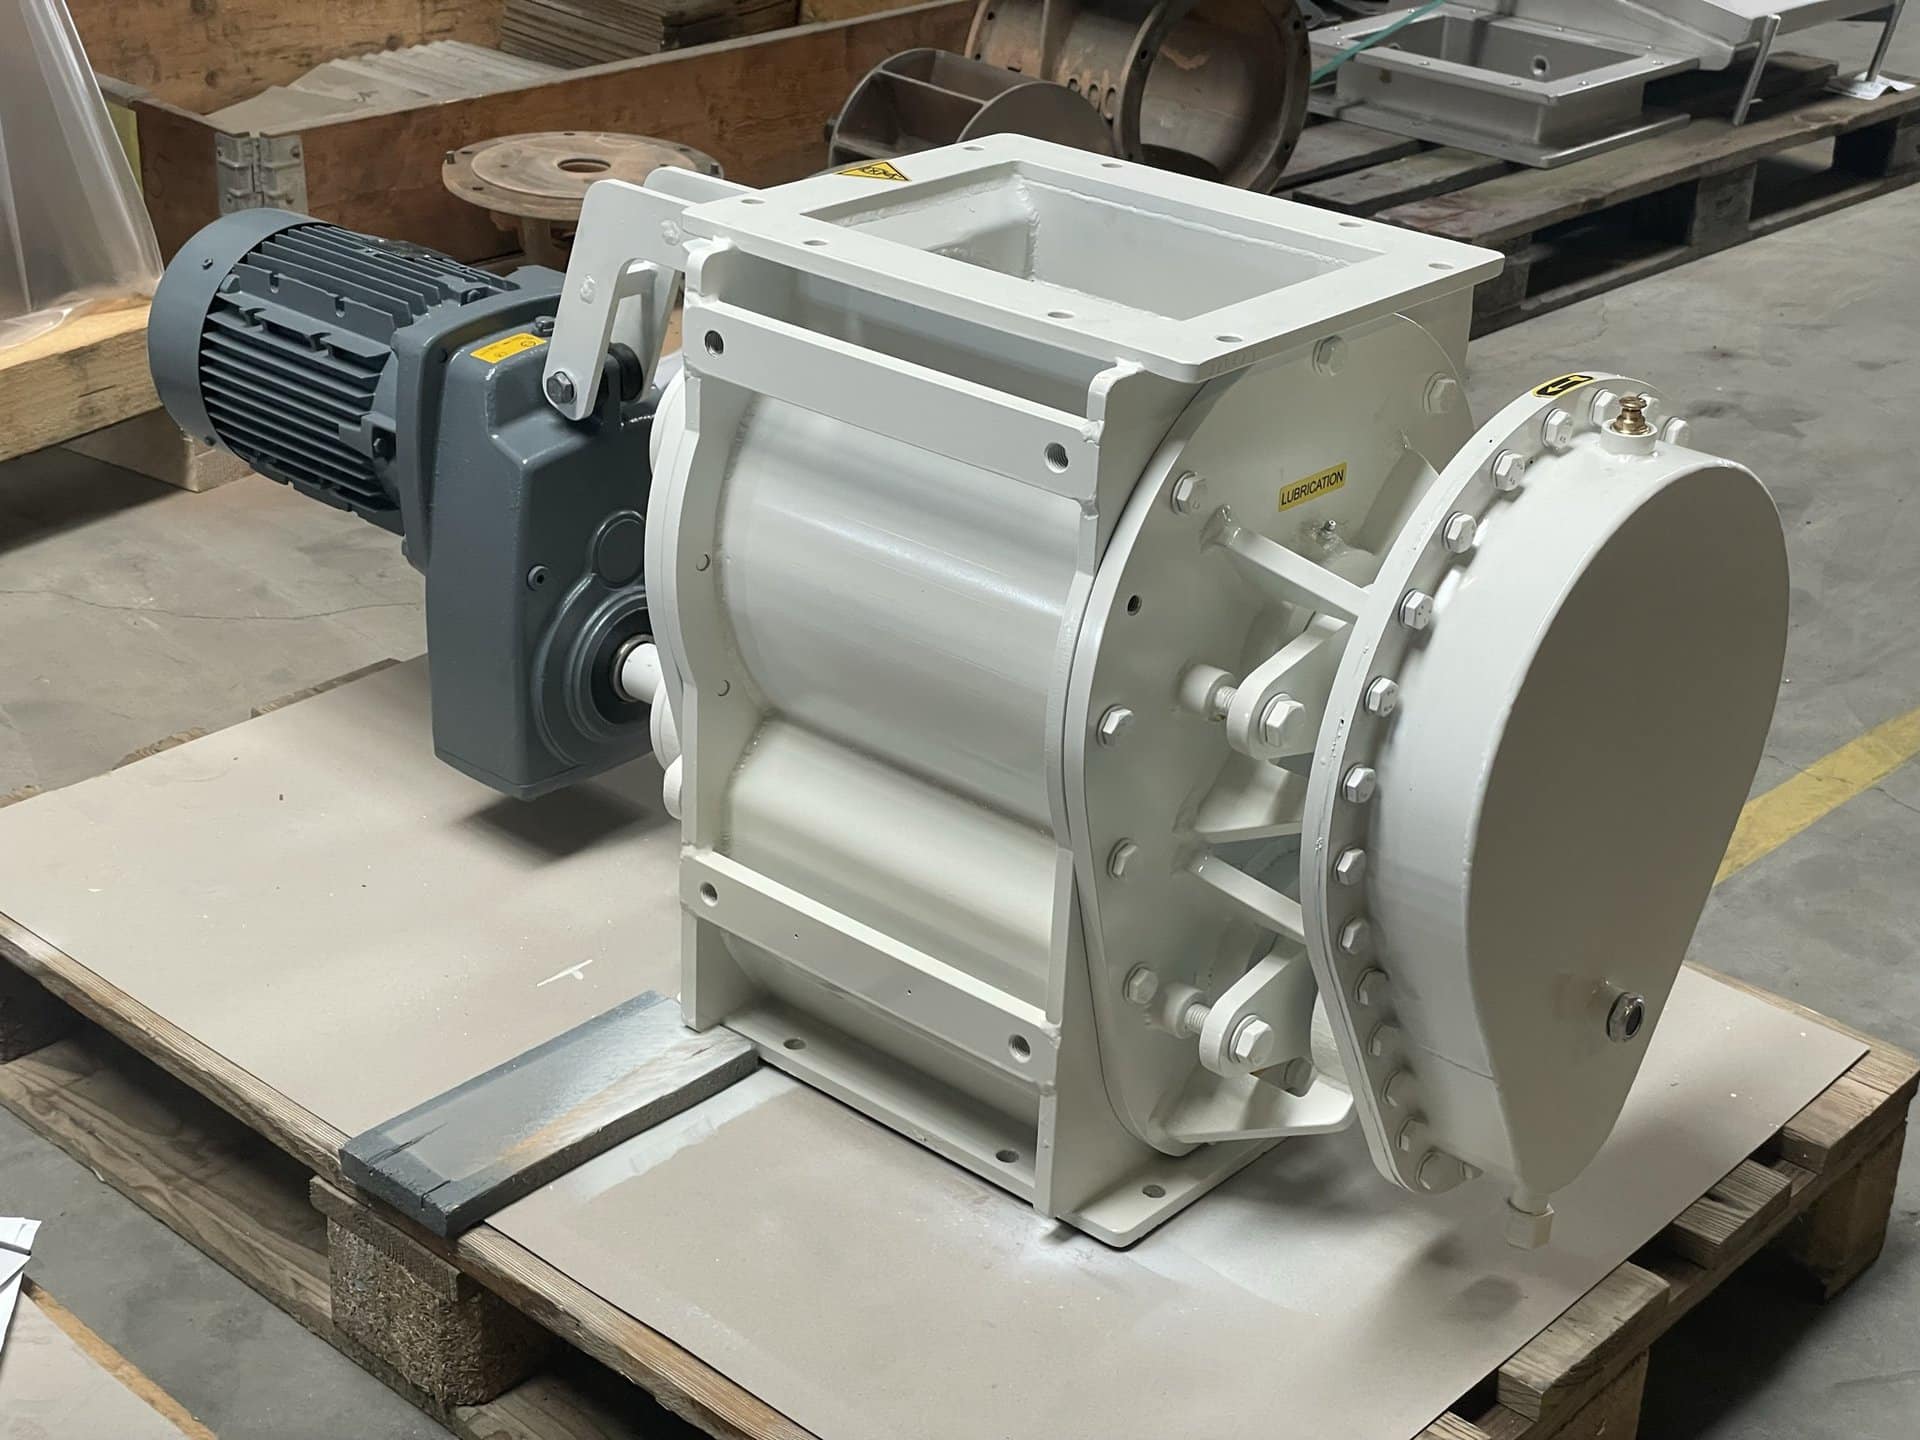 Self-cleaning rotary valve on a pallet ready to be shipped.